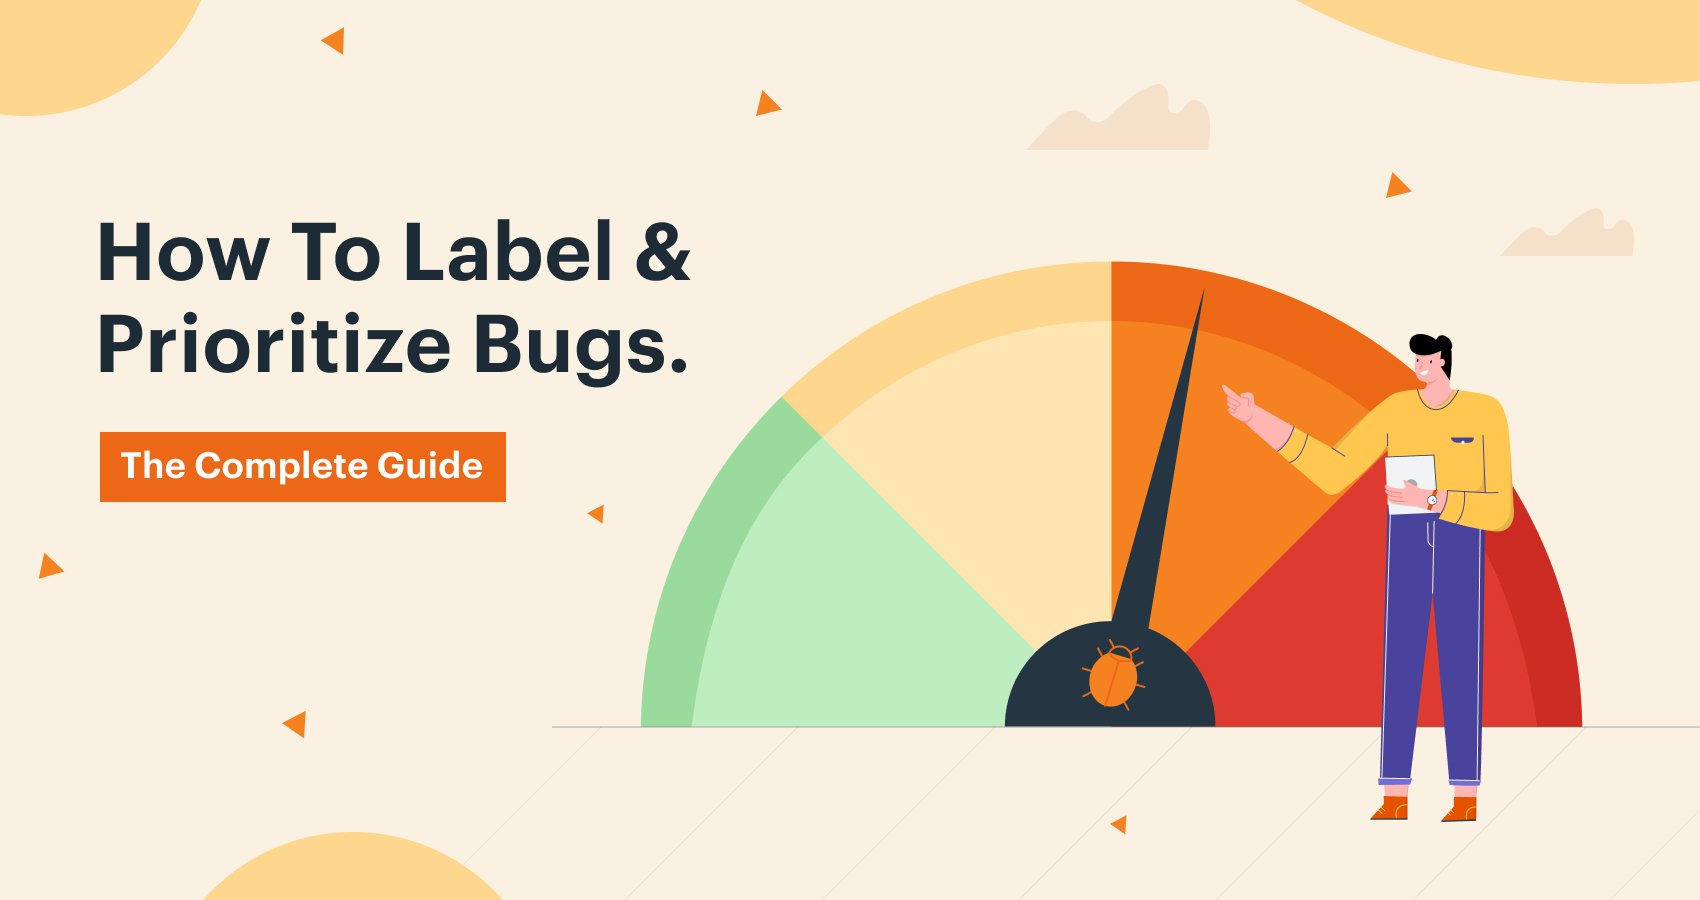 How to Label & Prioritize Bugs - Complete Guide